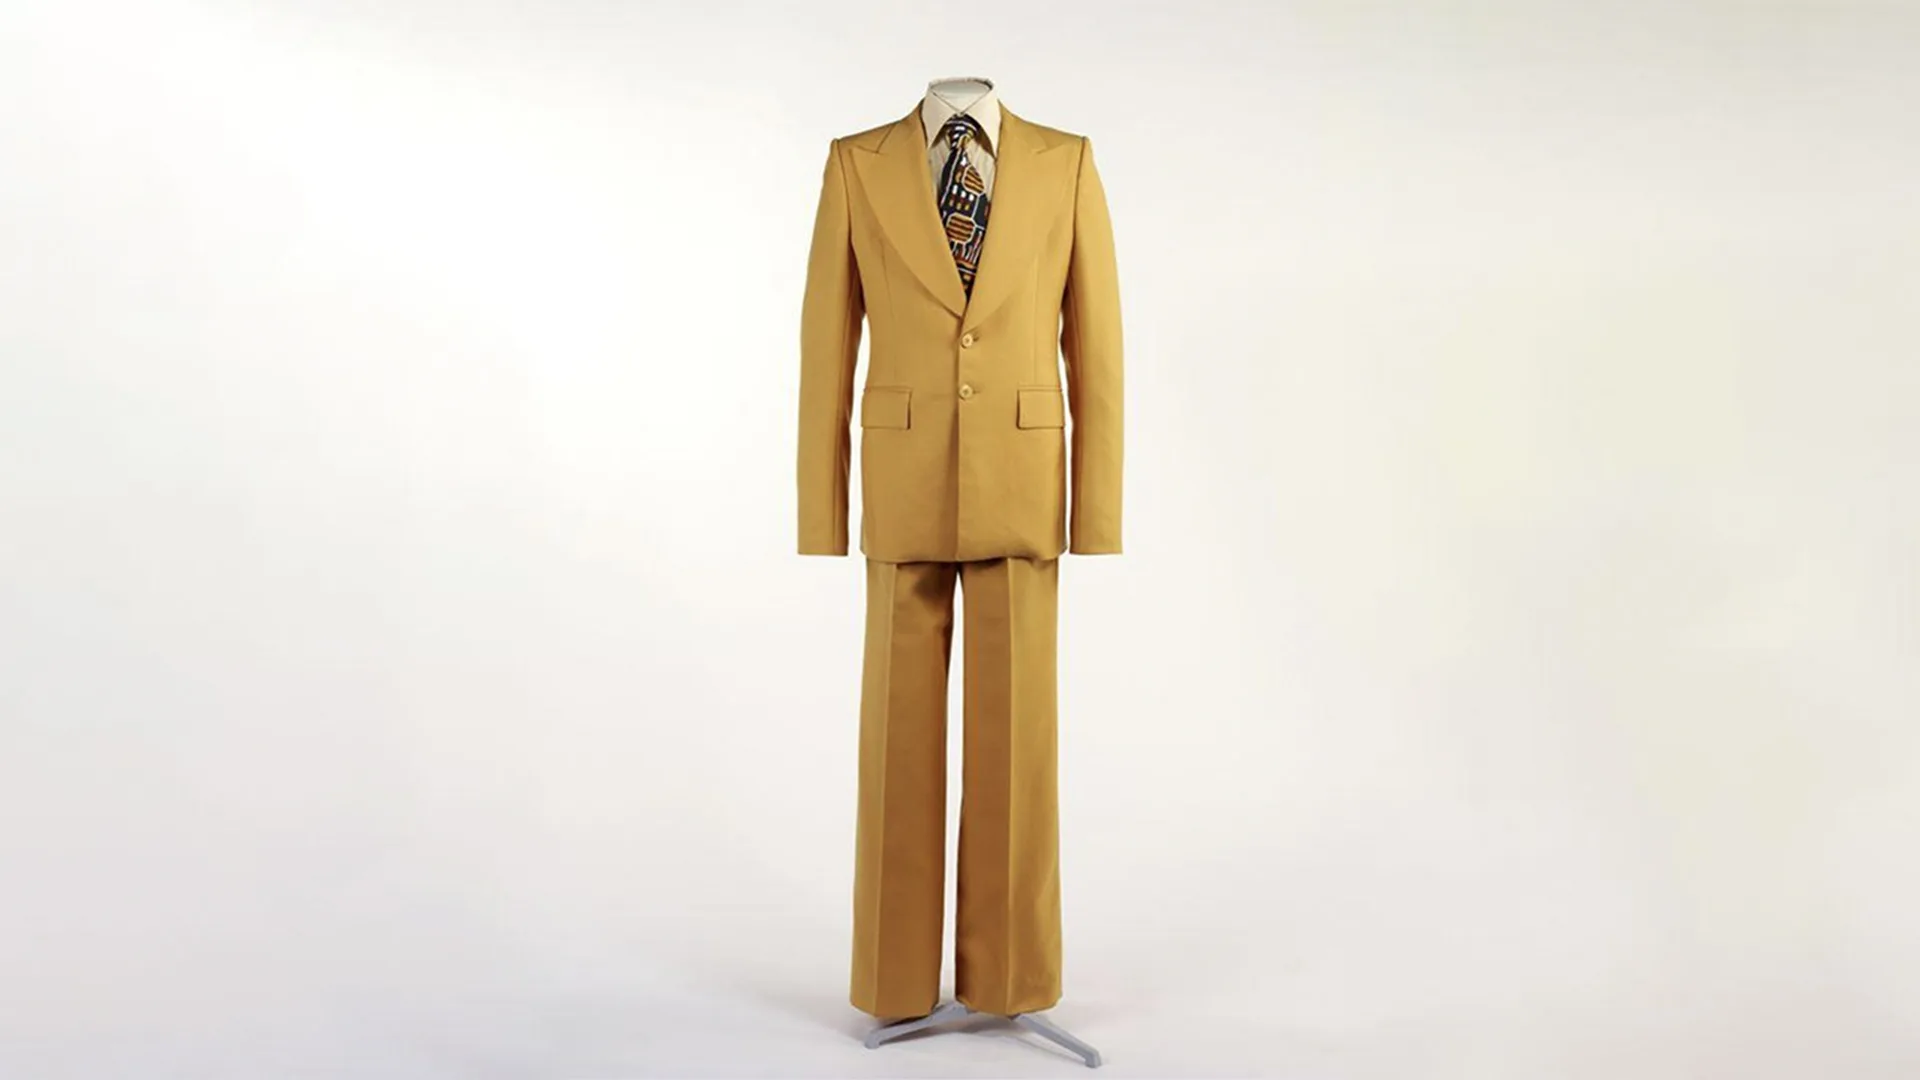 A yellow suit